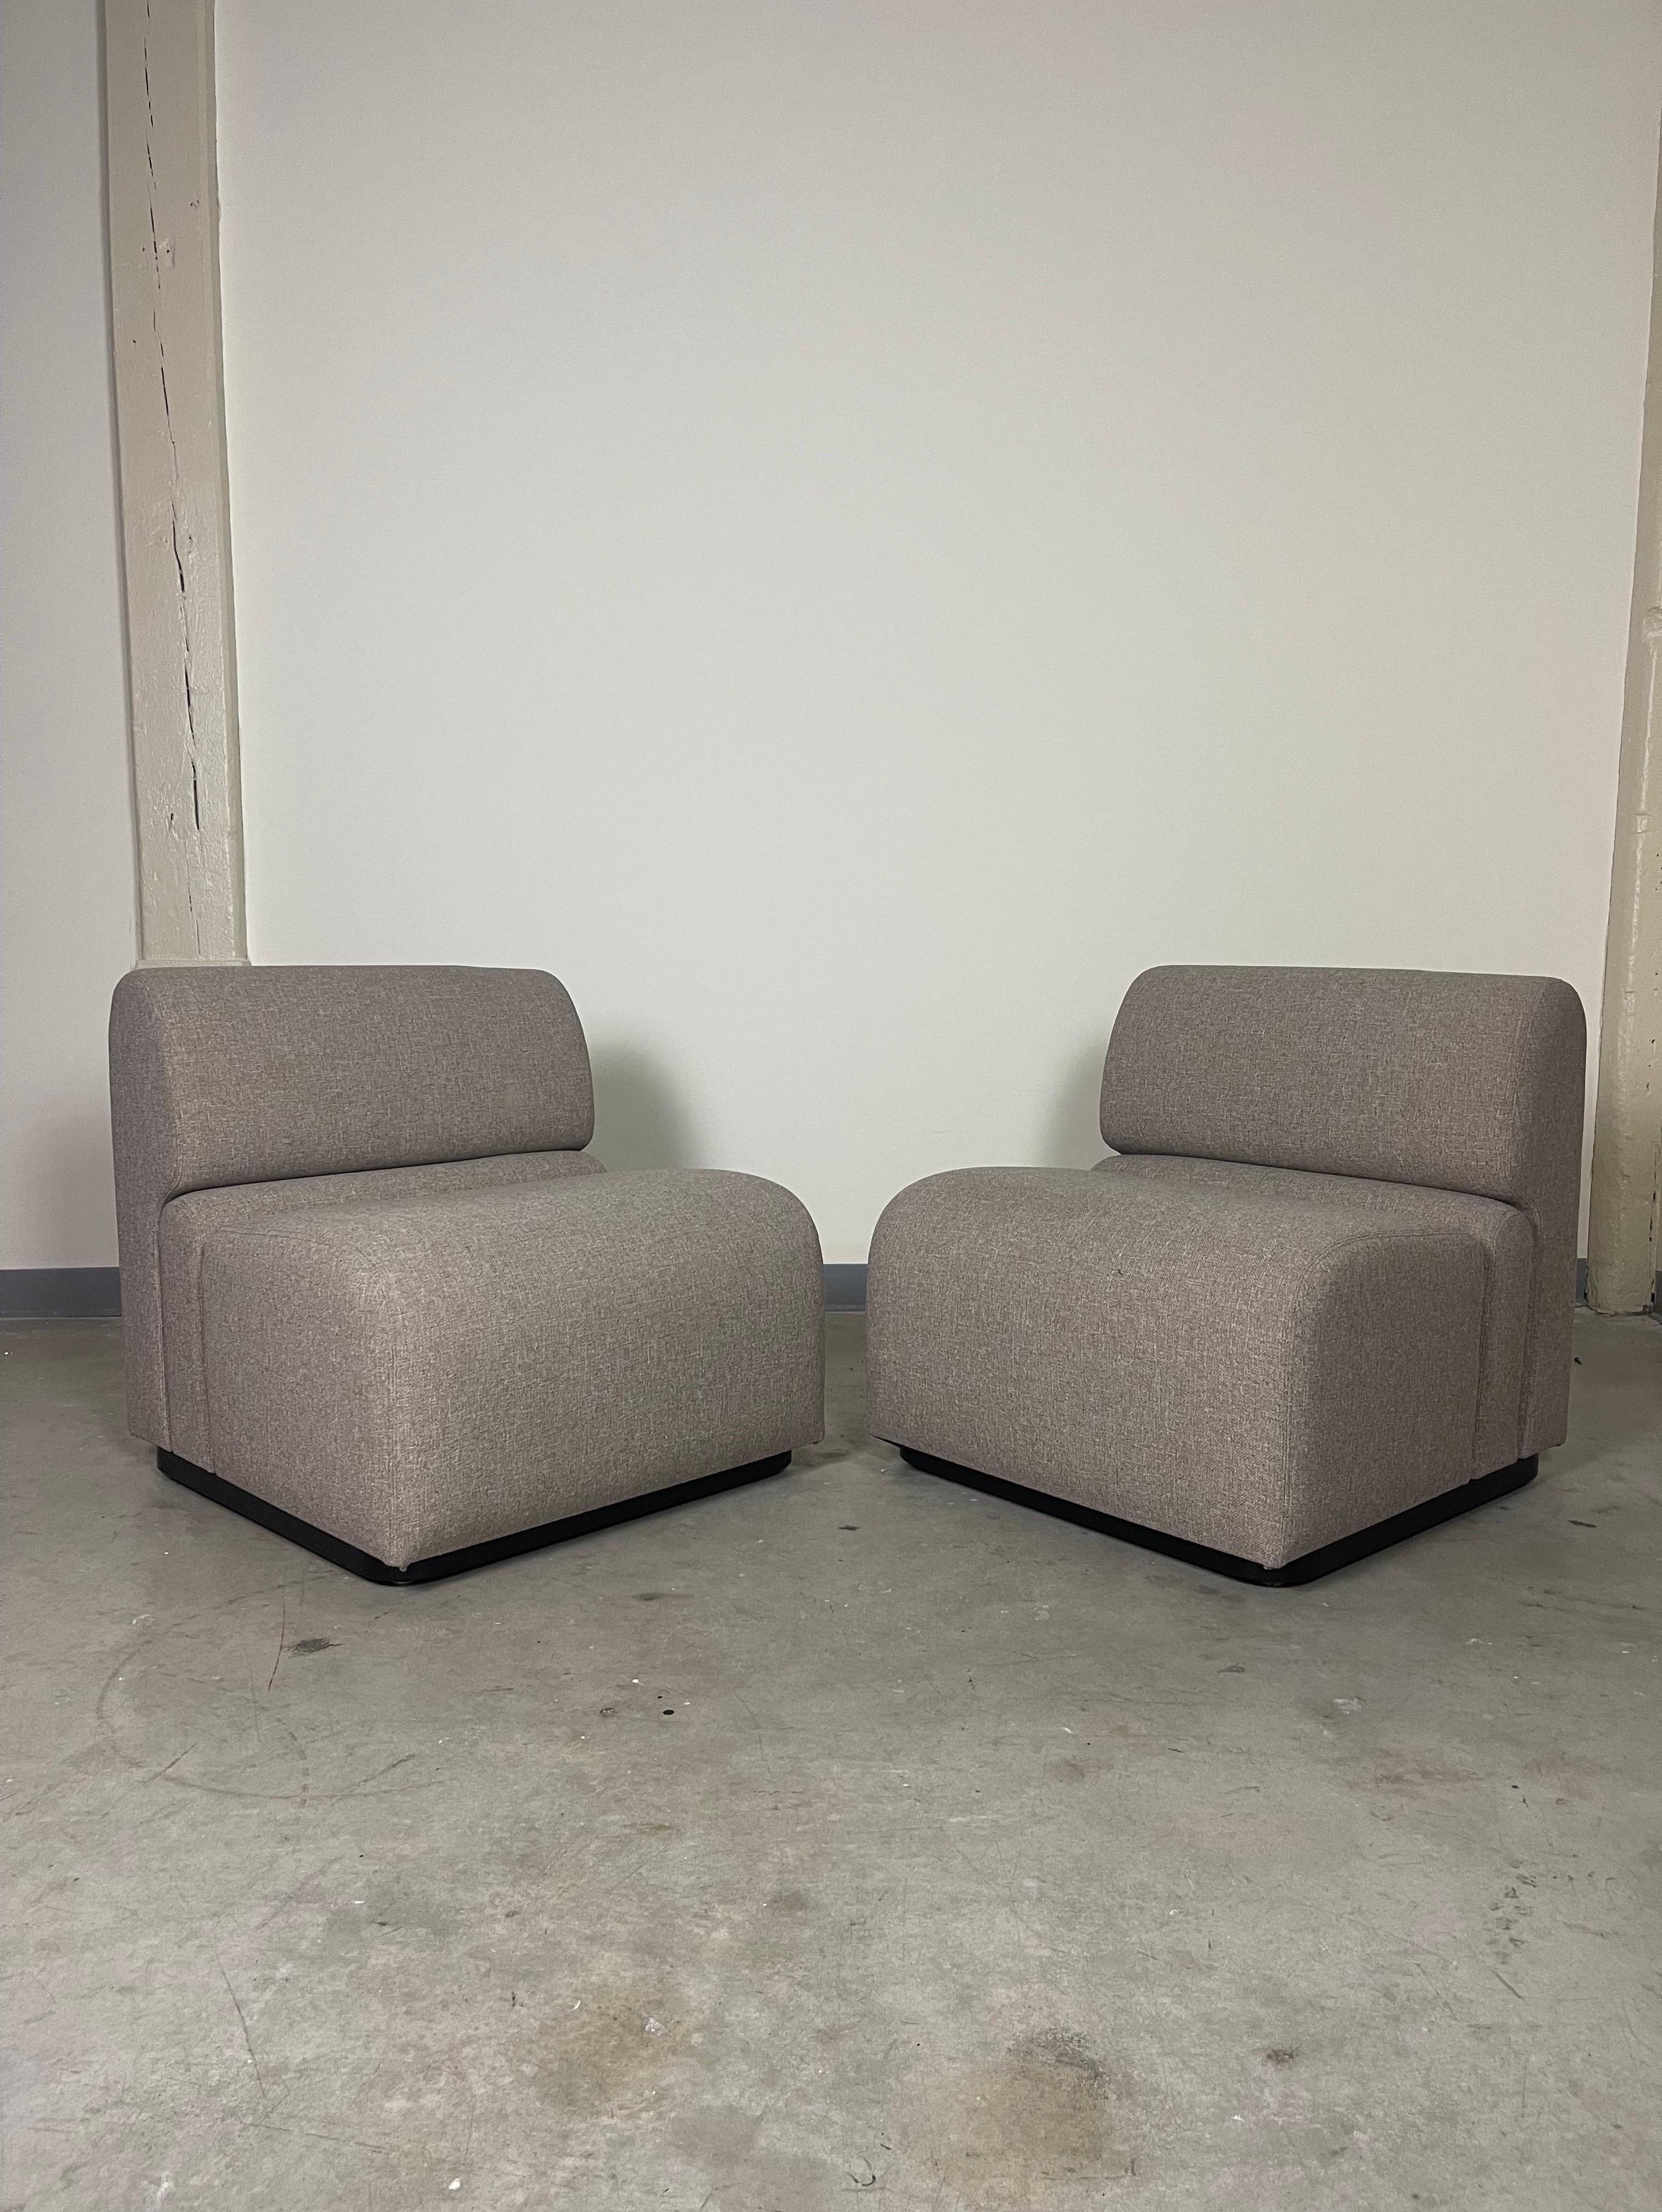 Unique pair of post modern slipper chairs in original wool. Chairs are manufactured by Jack Cartwright and retain the original sales tags and labels. Original upholstery is in excellent condition with no flaws. Black metal bases have some minor